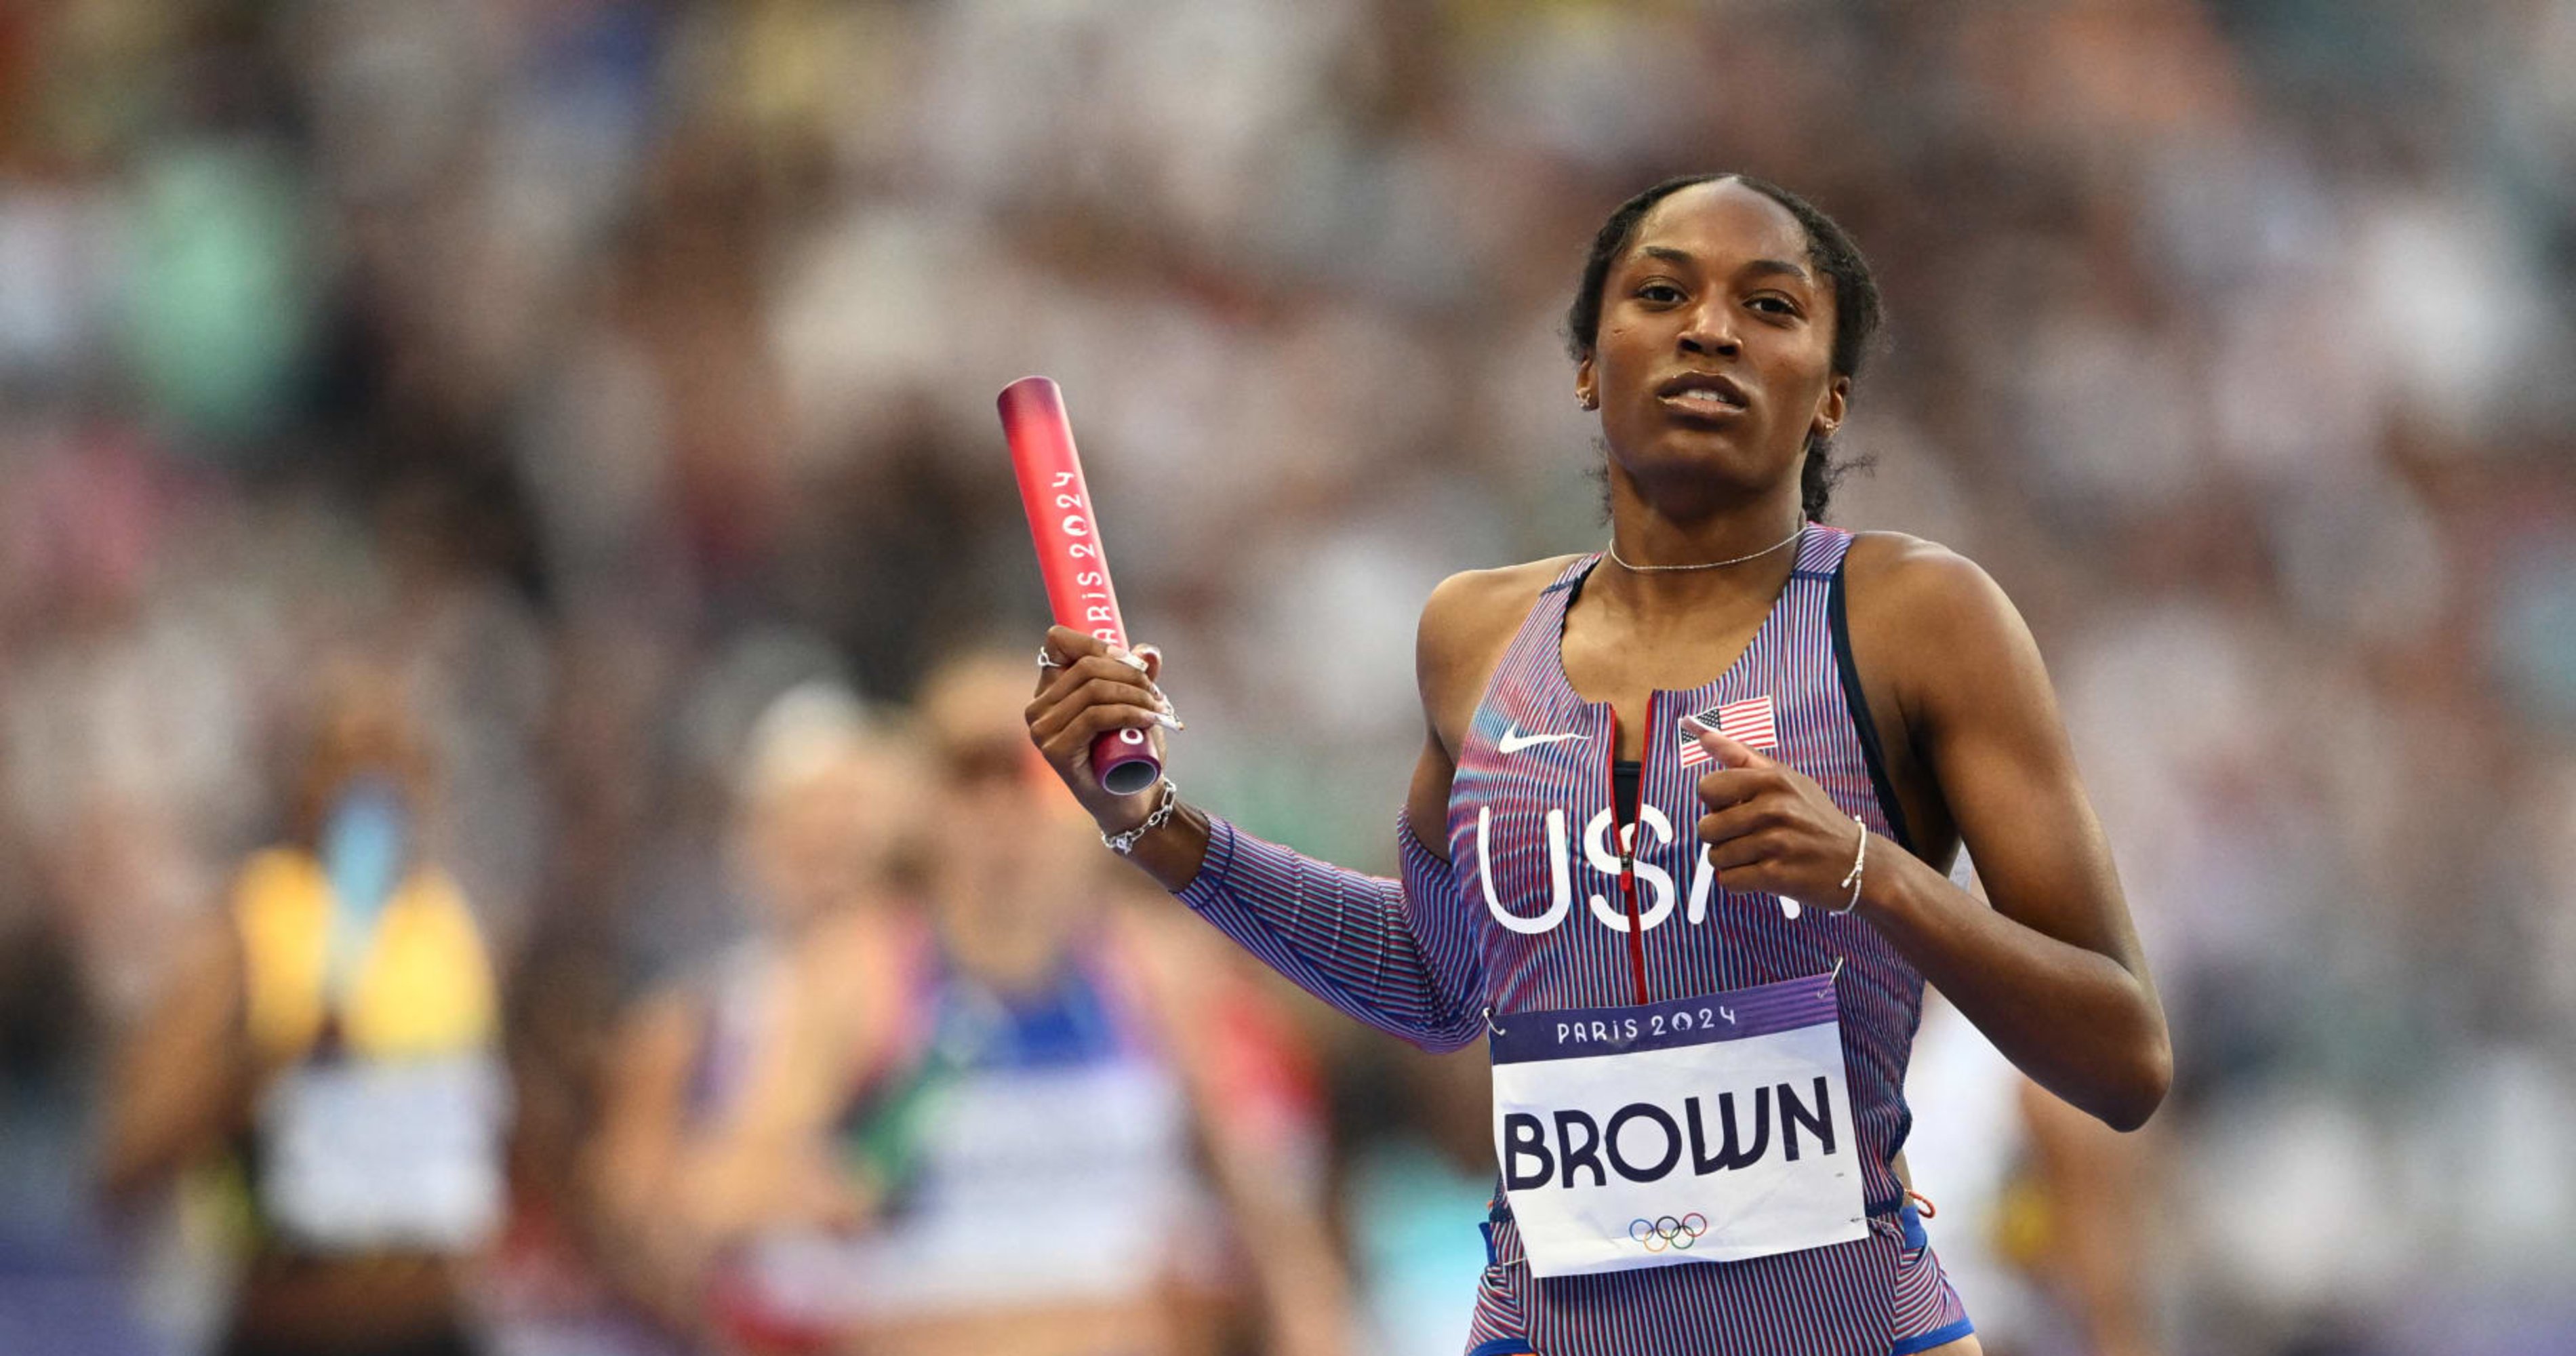 Video: Kaylyn Brown, USA Set World Record in Mixed 4x400M Olympic Relay Qualifying